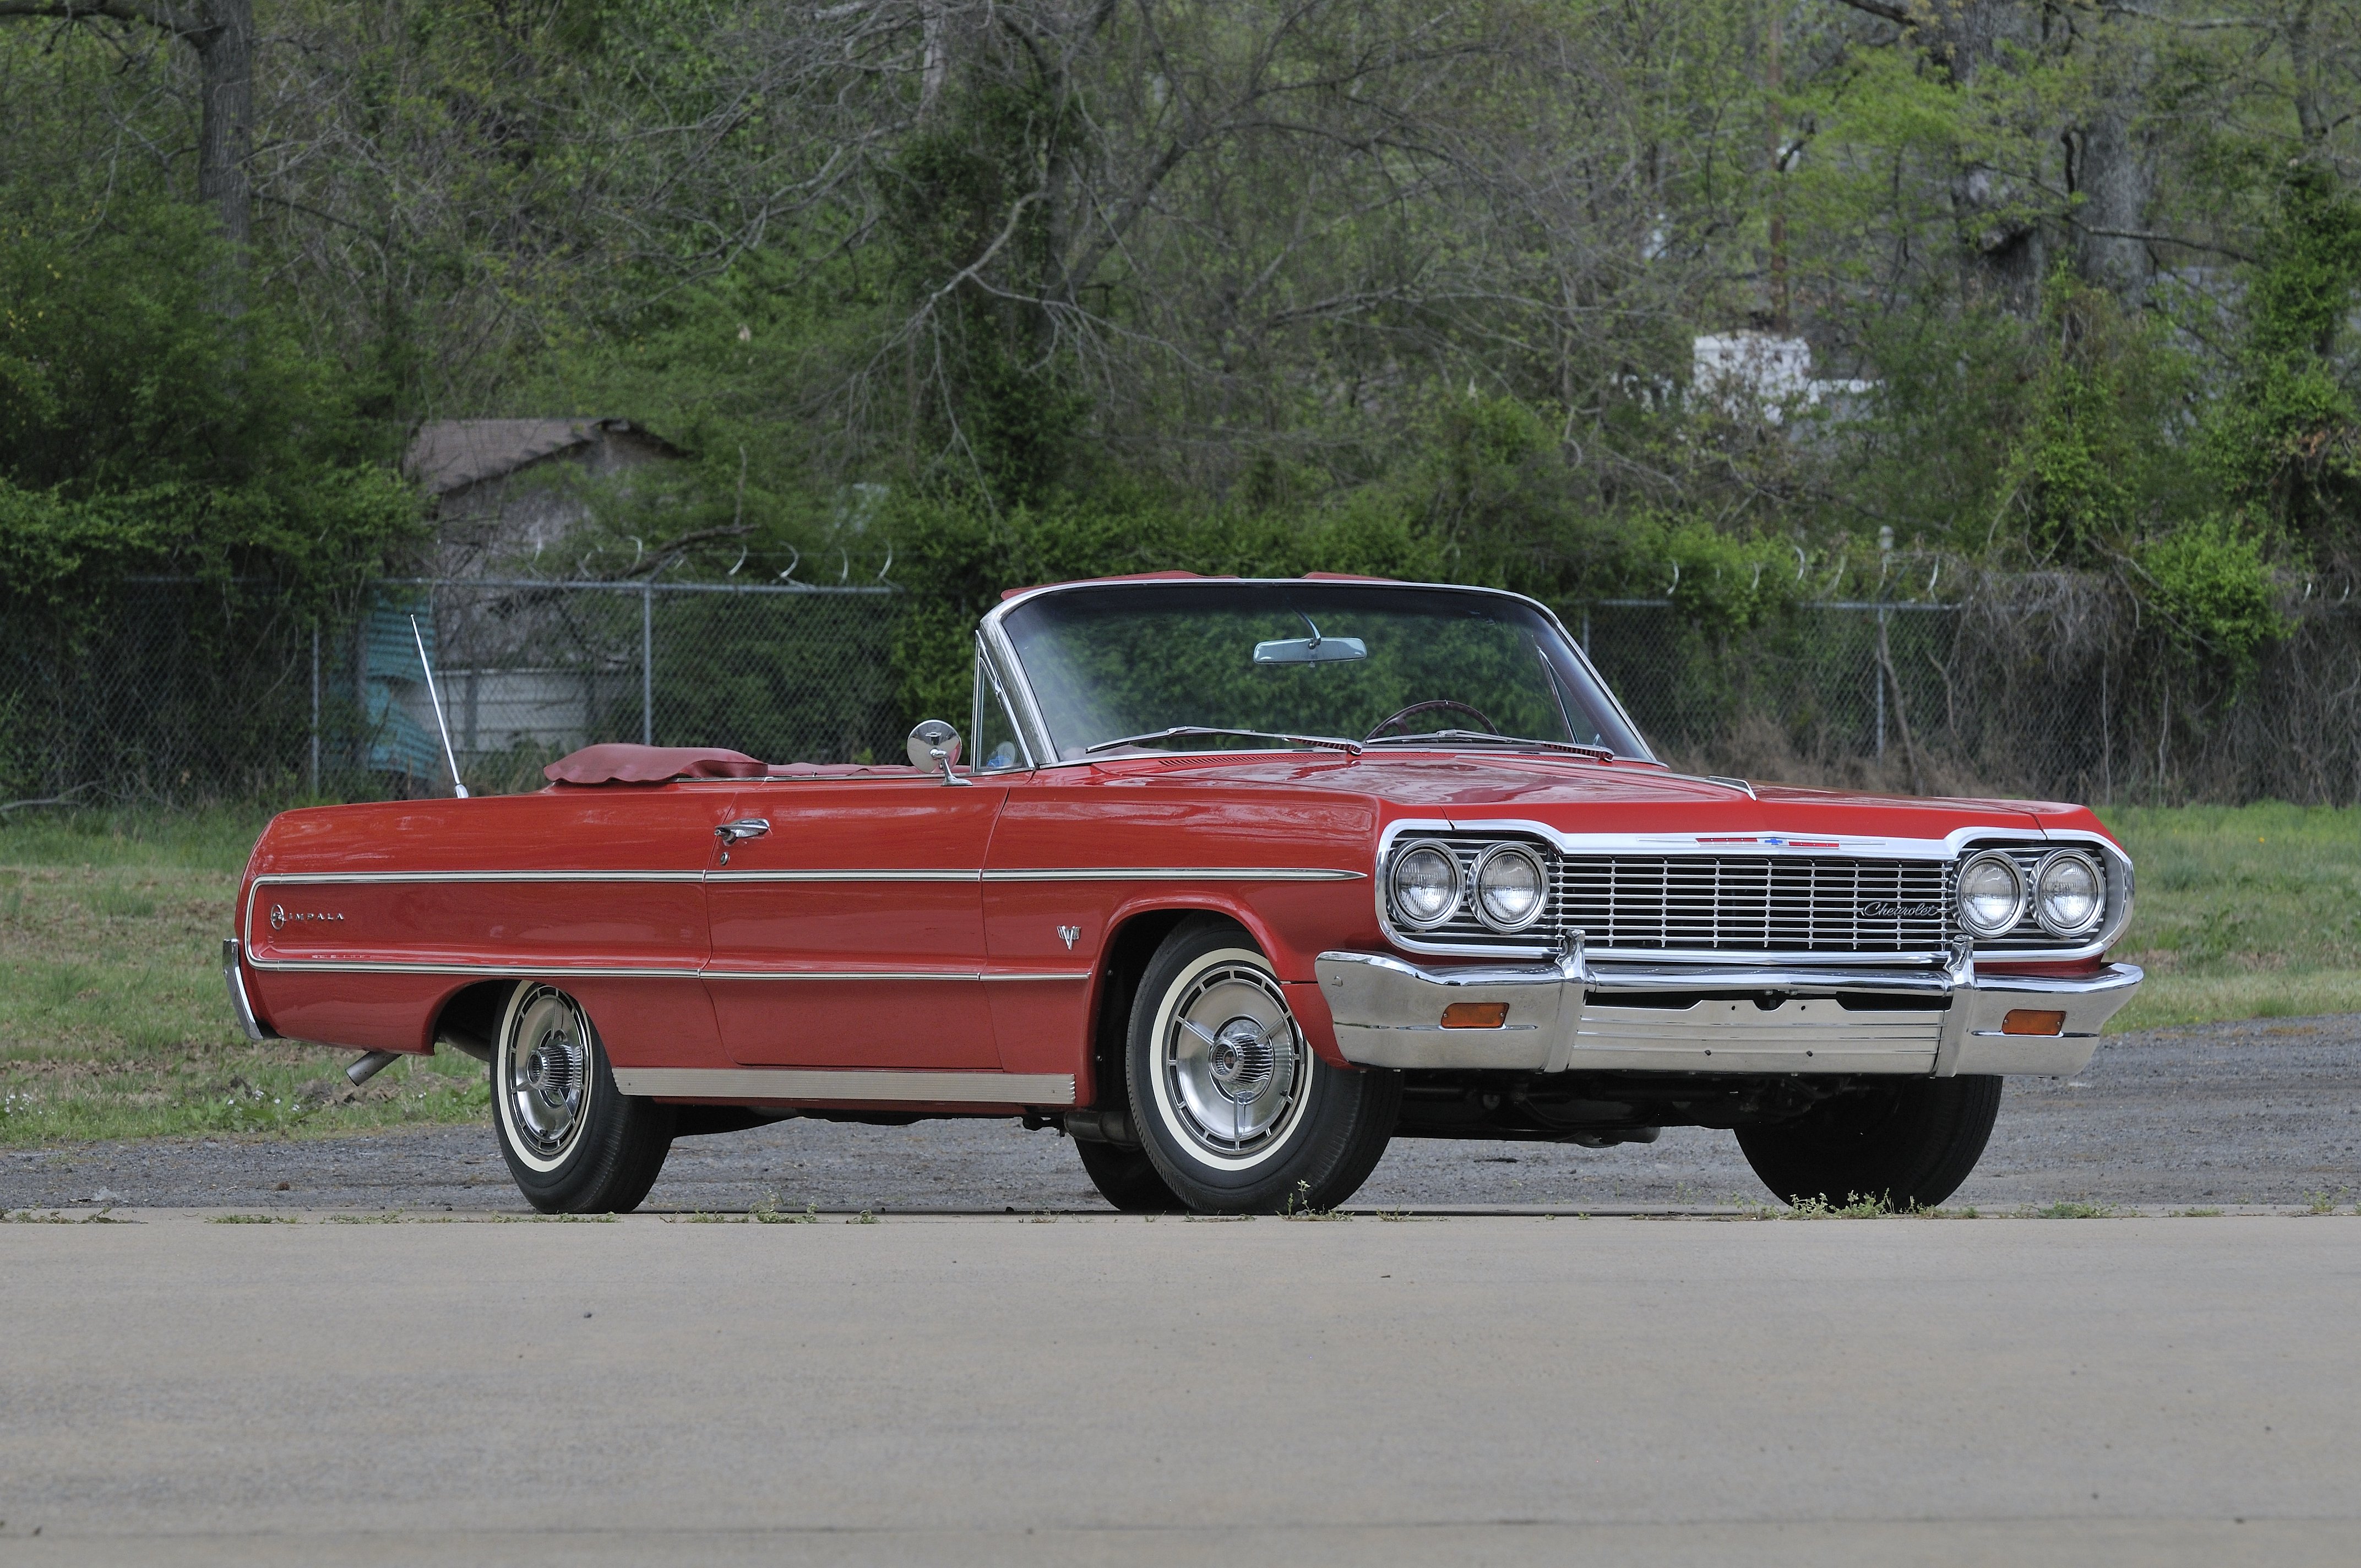 1964, Chevrolet, Impala, Ss, Convertible, Red, Classic old, Usa, 4288x2848 01 Wallpaper